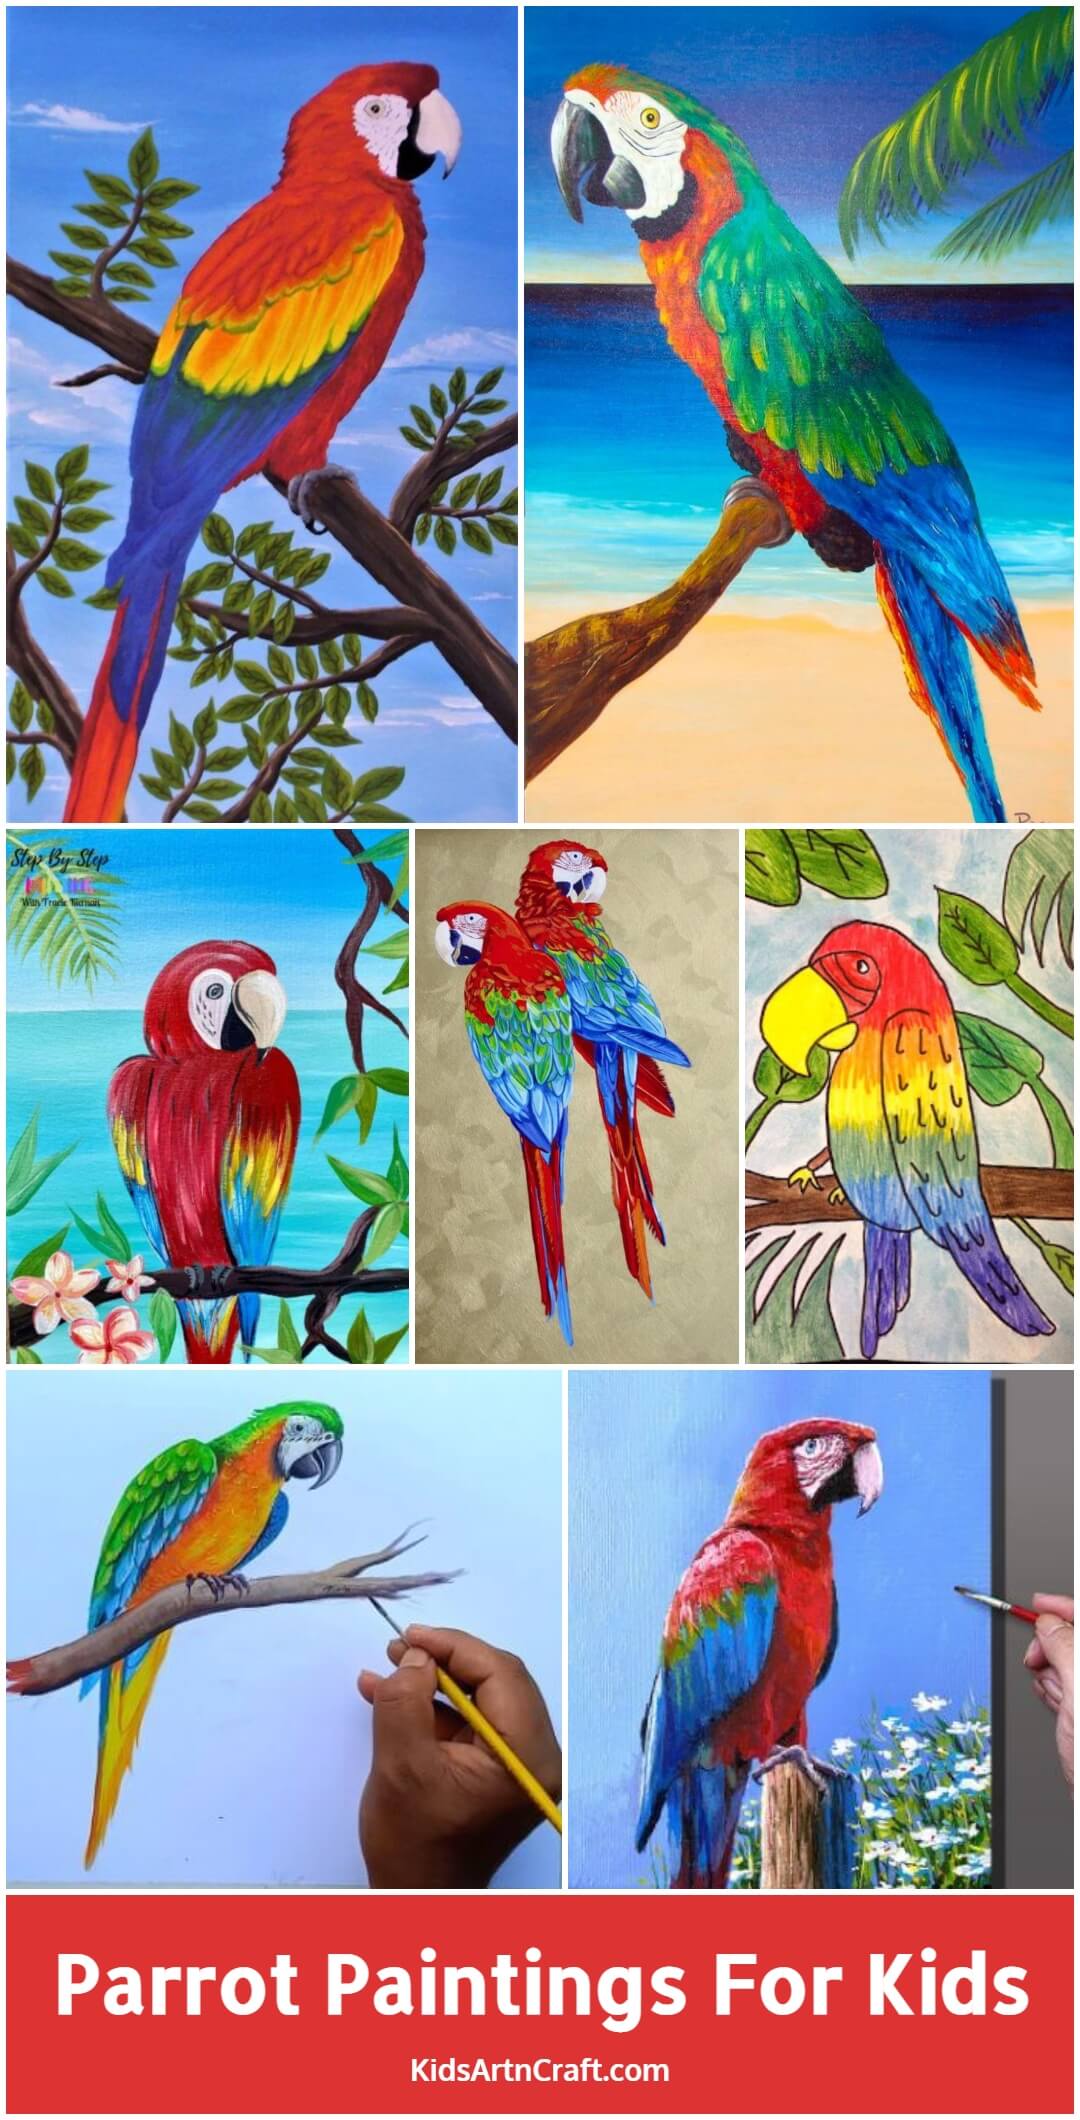 Parrot Paintings For Kids